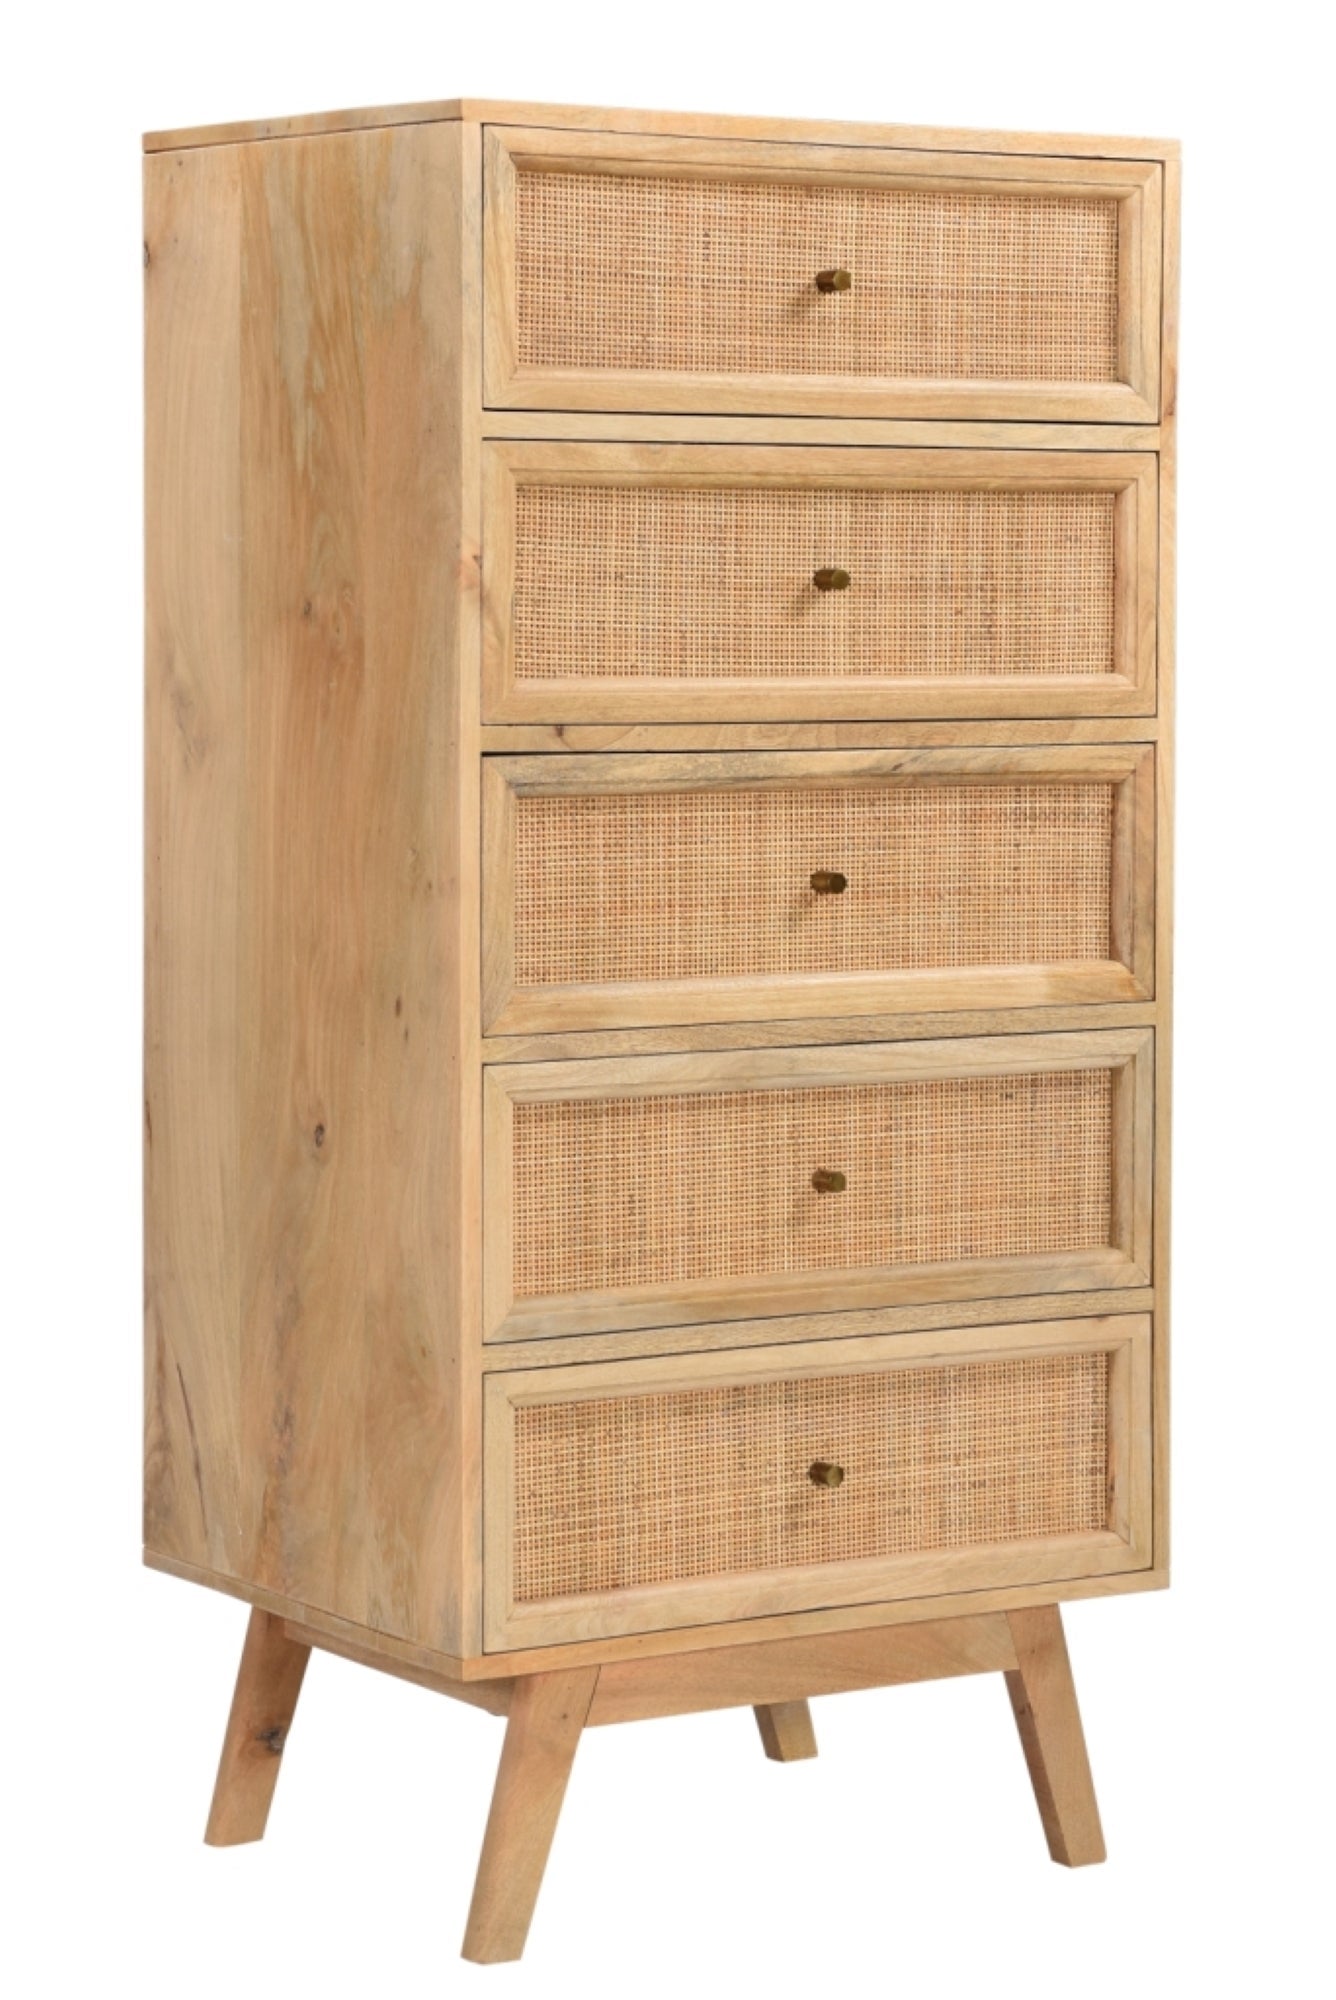 31% off, SP0301Q, Raphia Tall Chest 5 Drawers, Natural